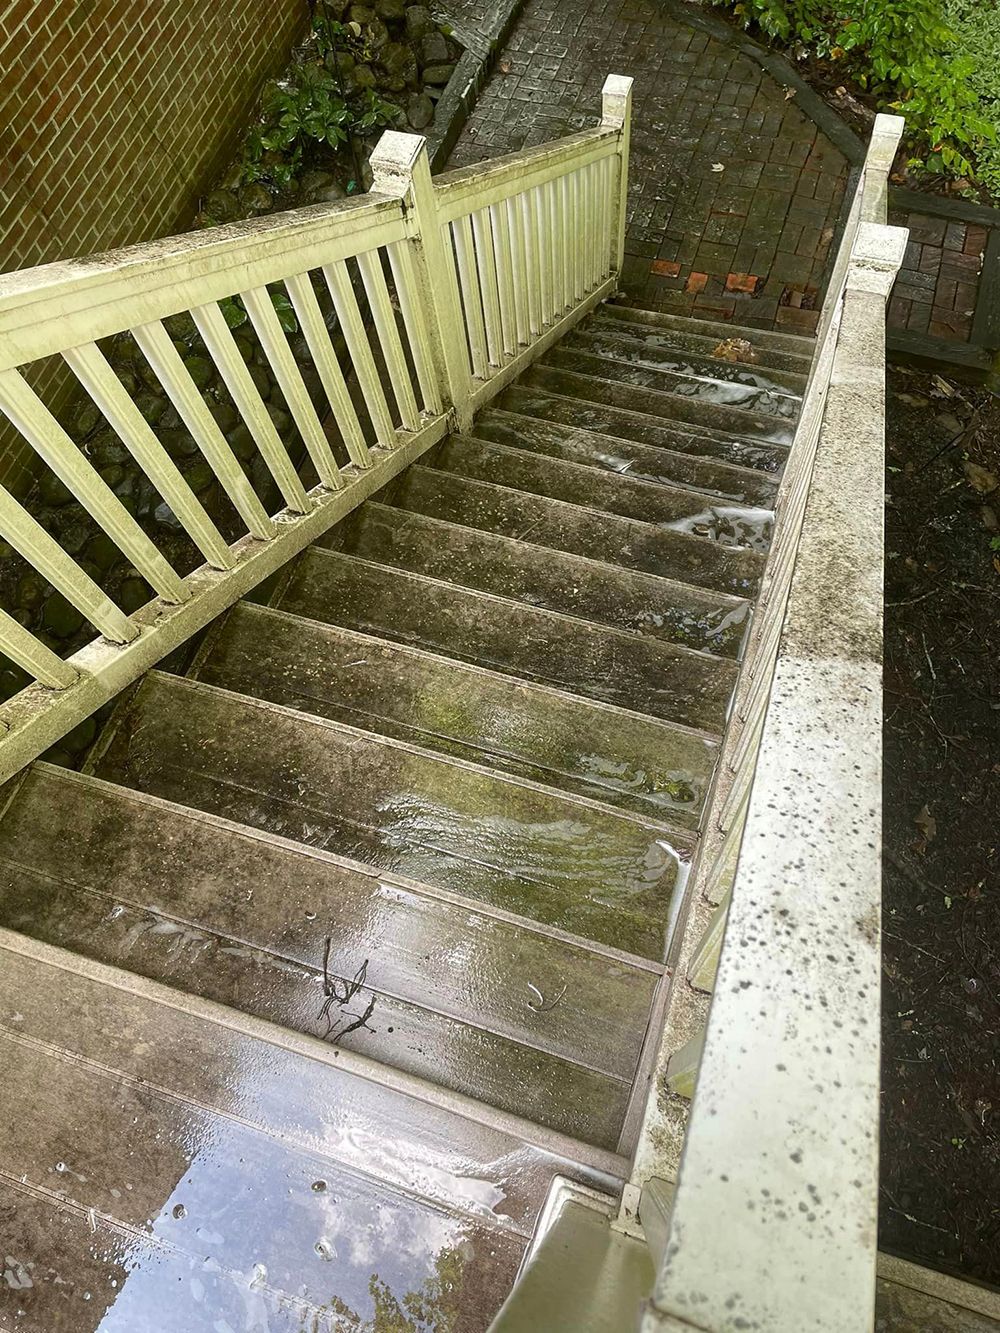 A set of stairs with a white railing and a puddle of water on the steps